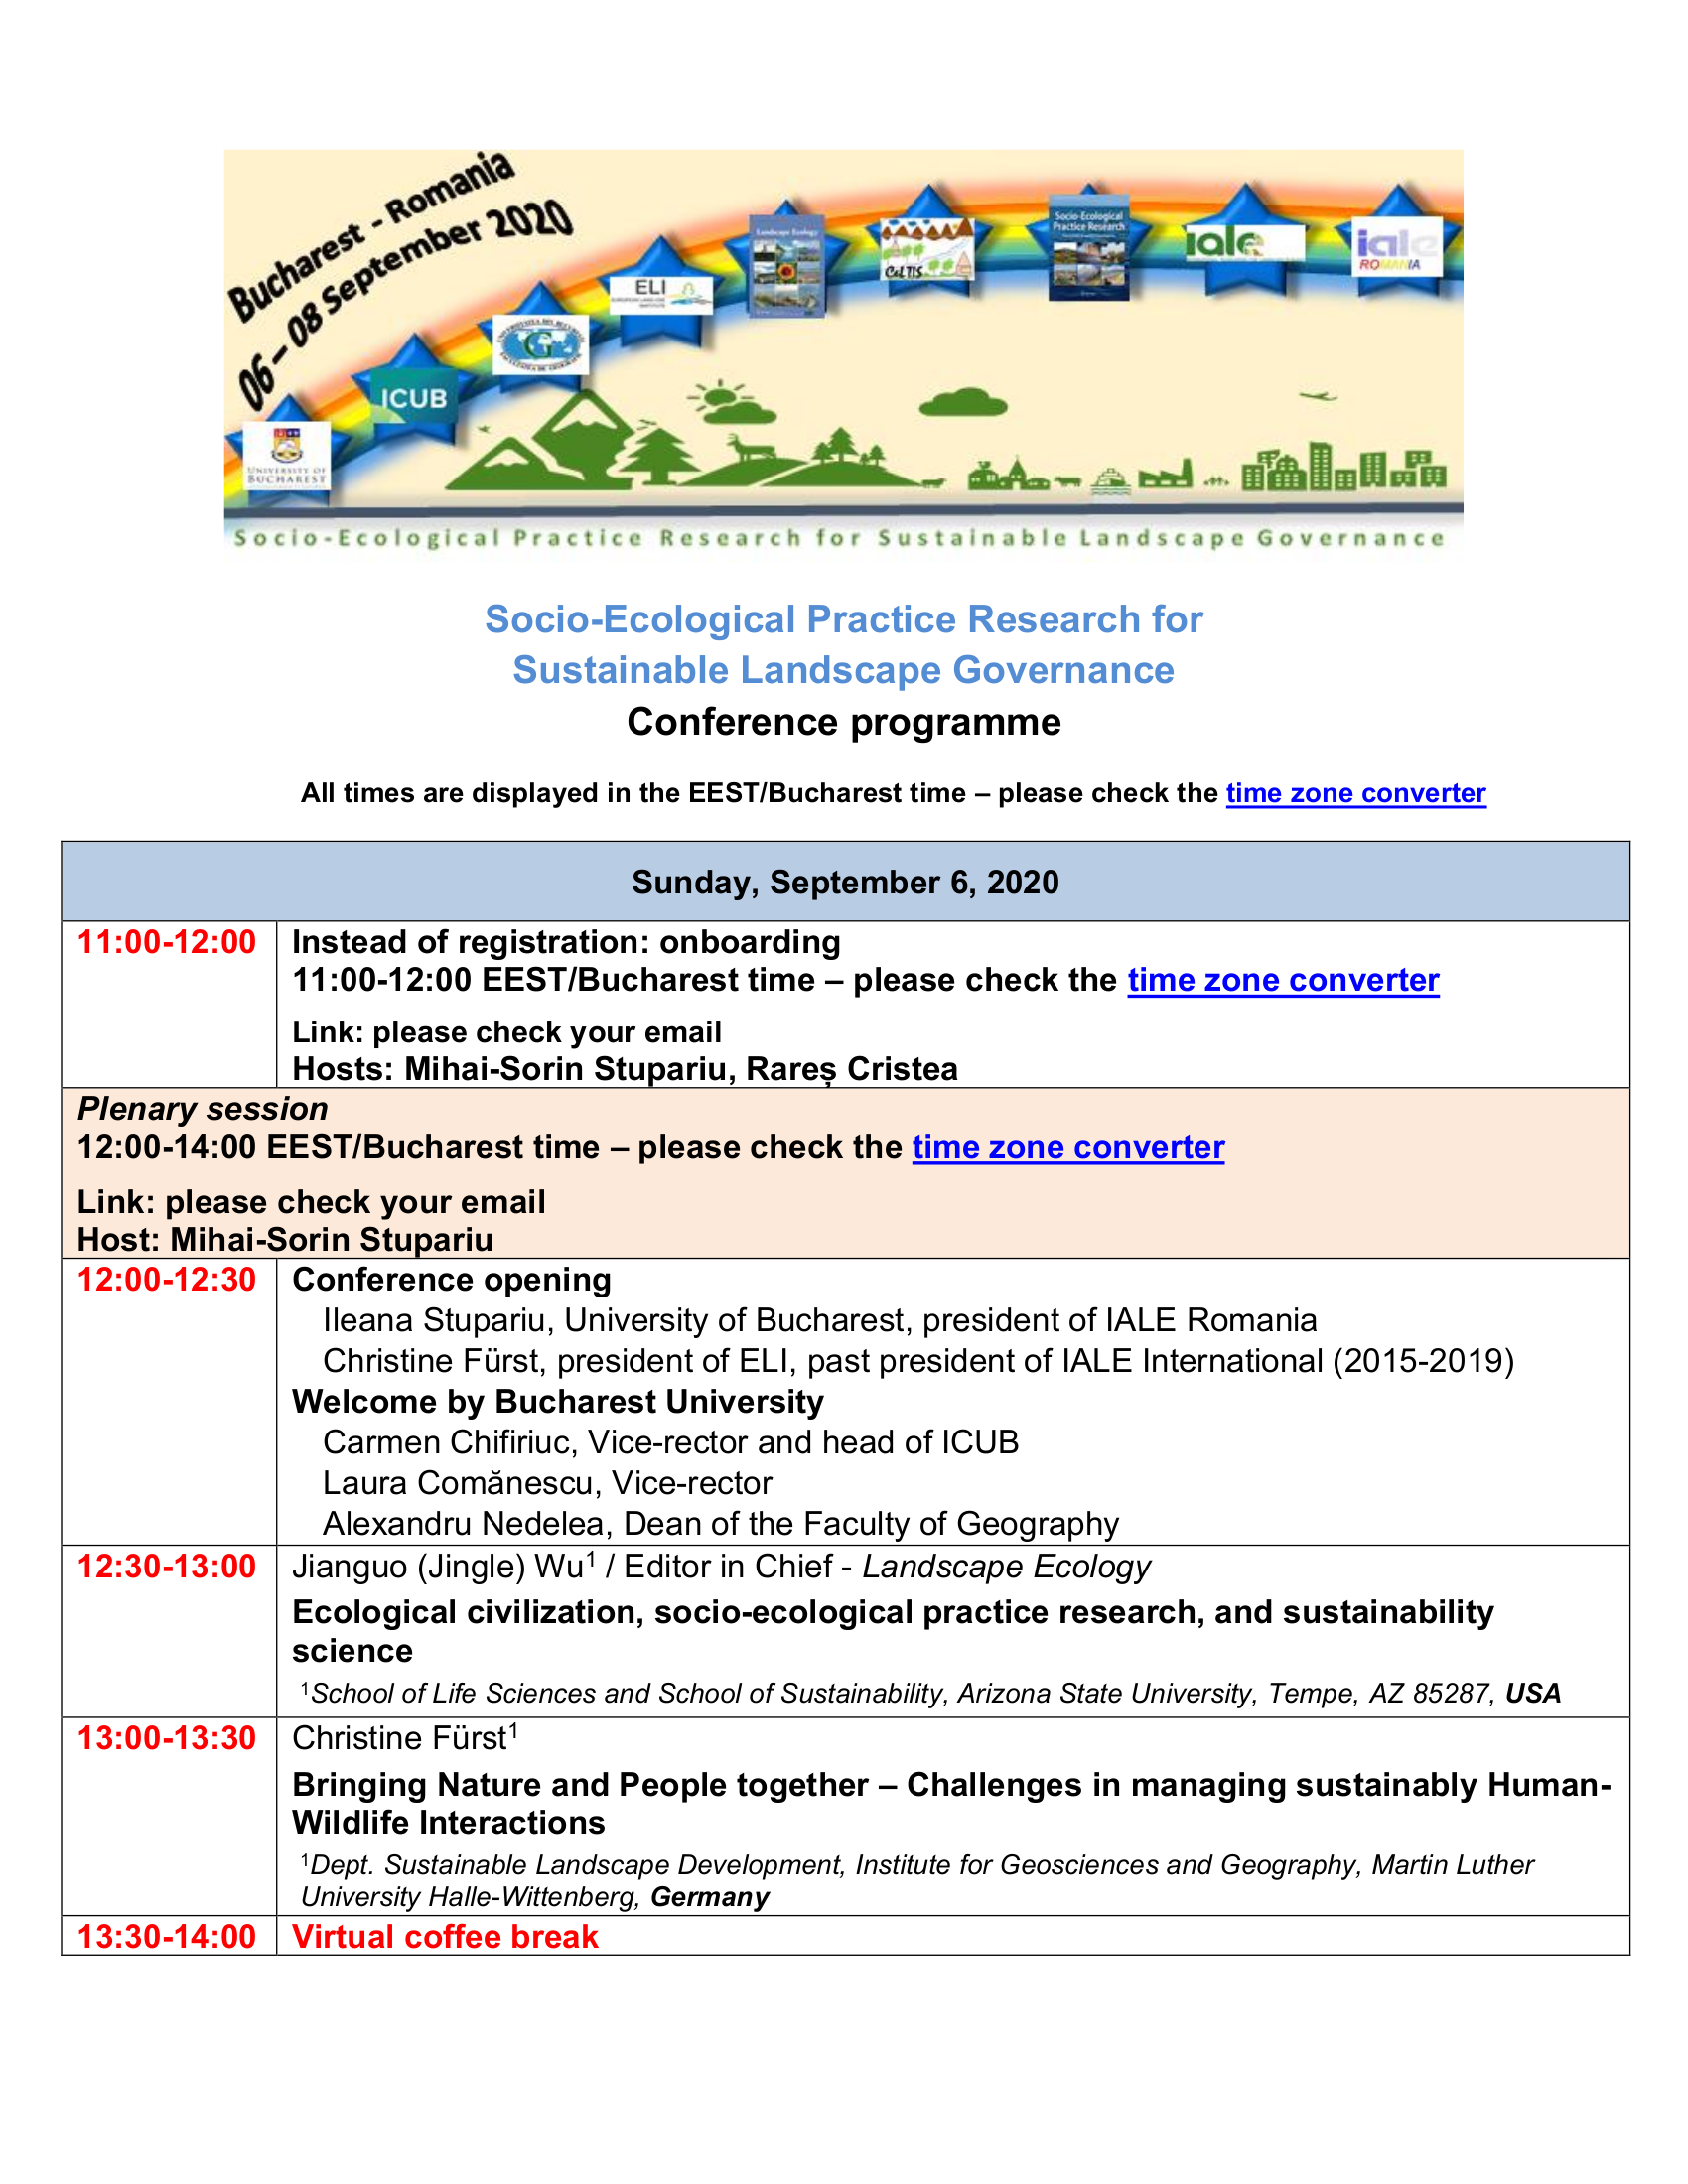 Conference programme <sup>[PDF]</sup>